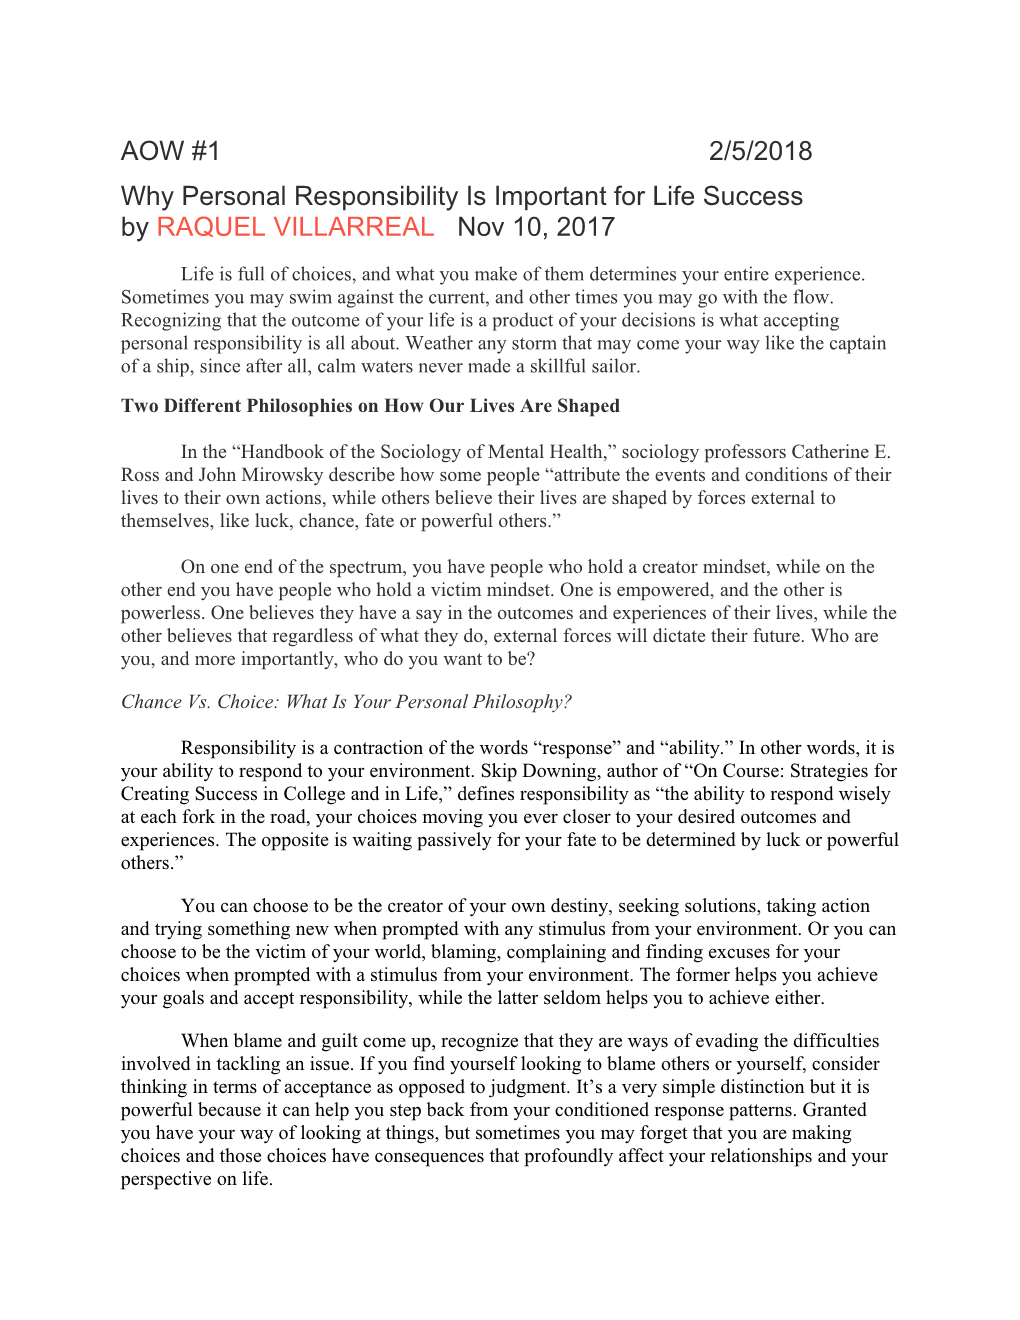 Why Personal Responsibility Is Important for Life Success